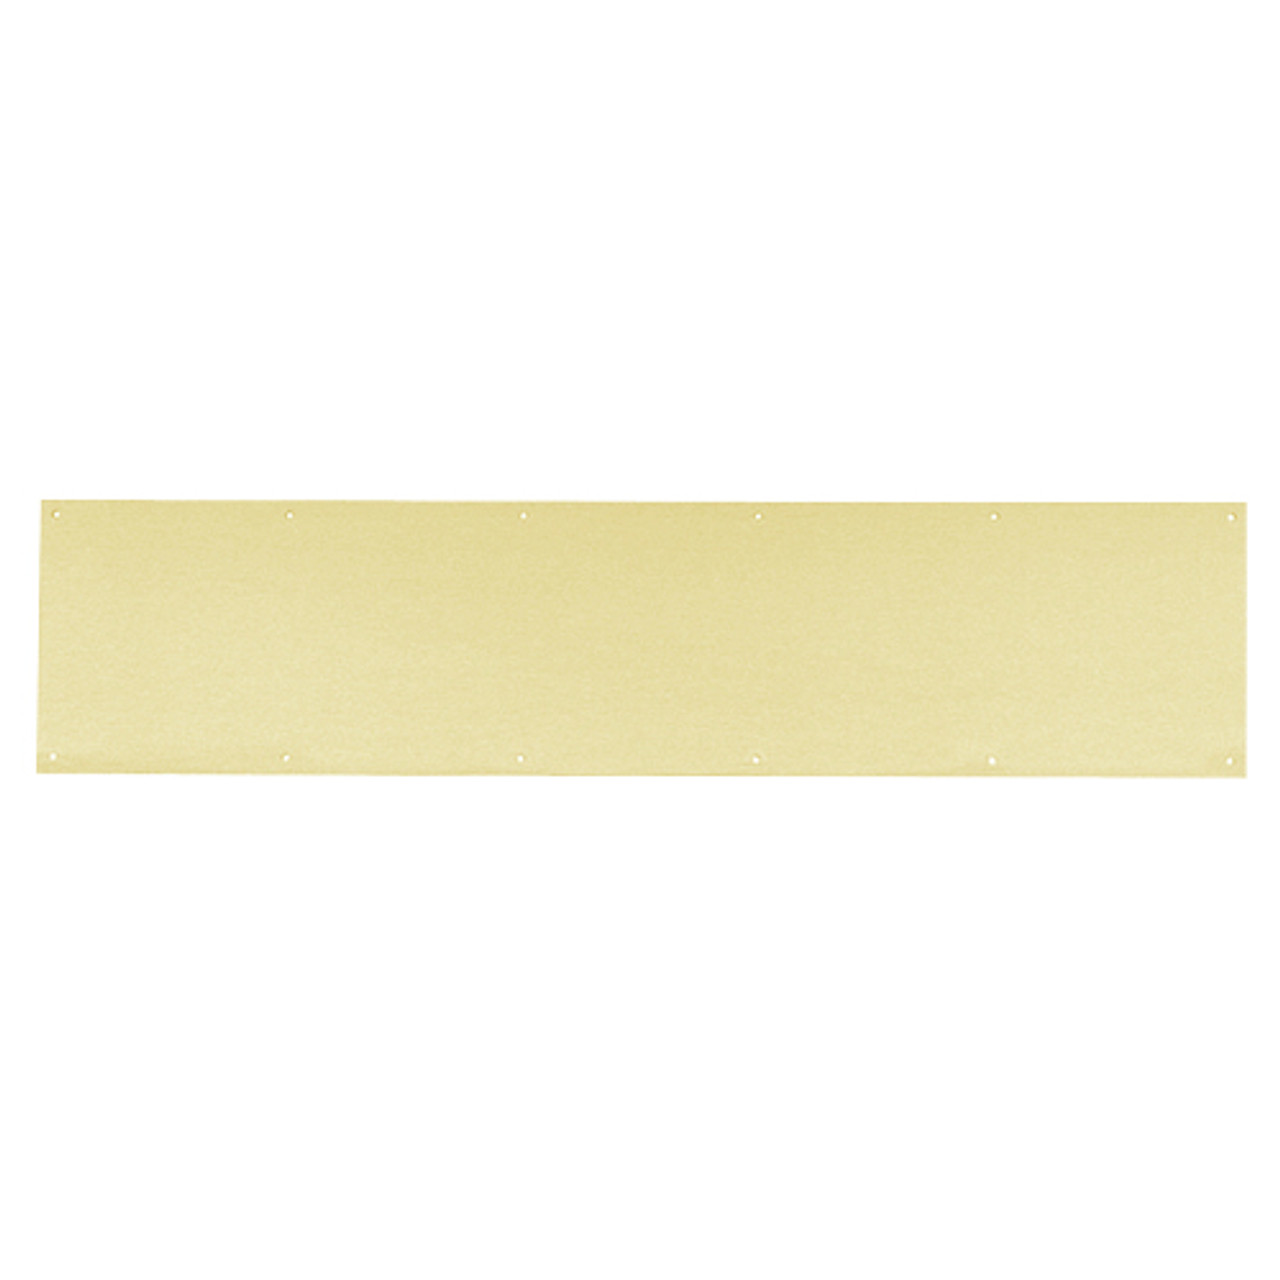 8400-US4-8x42-B-CS Ives 8400 Series Protection Plate in Satin Brass